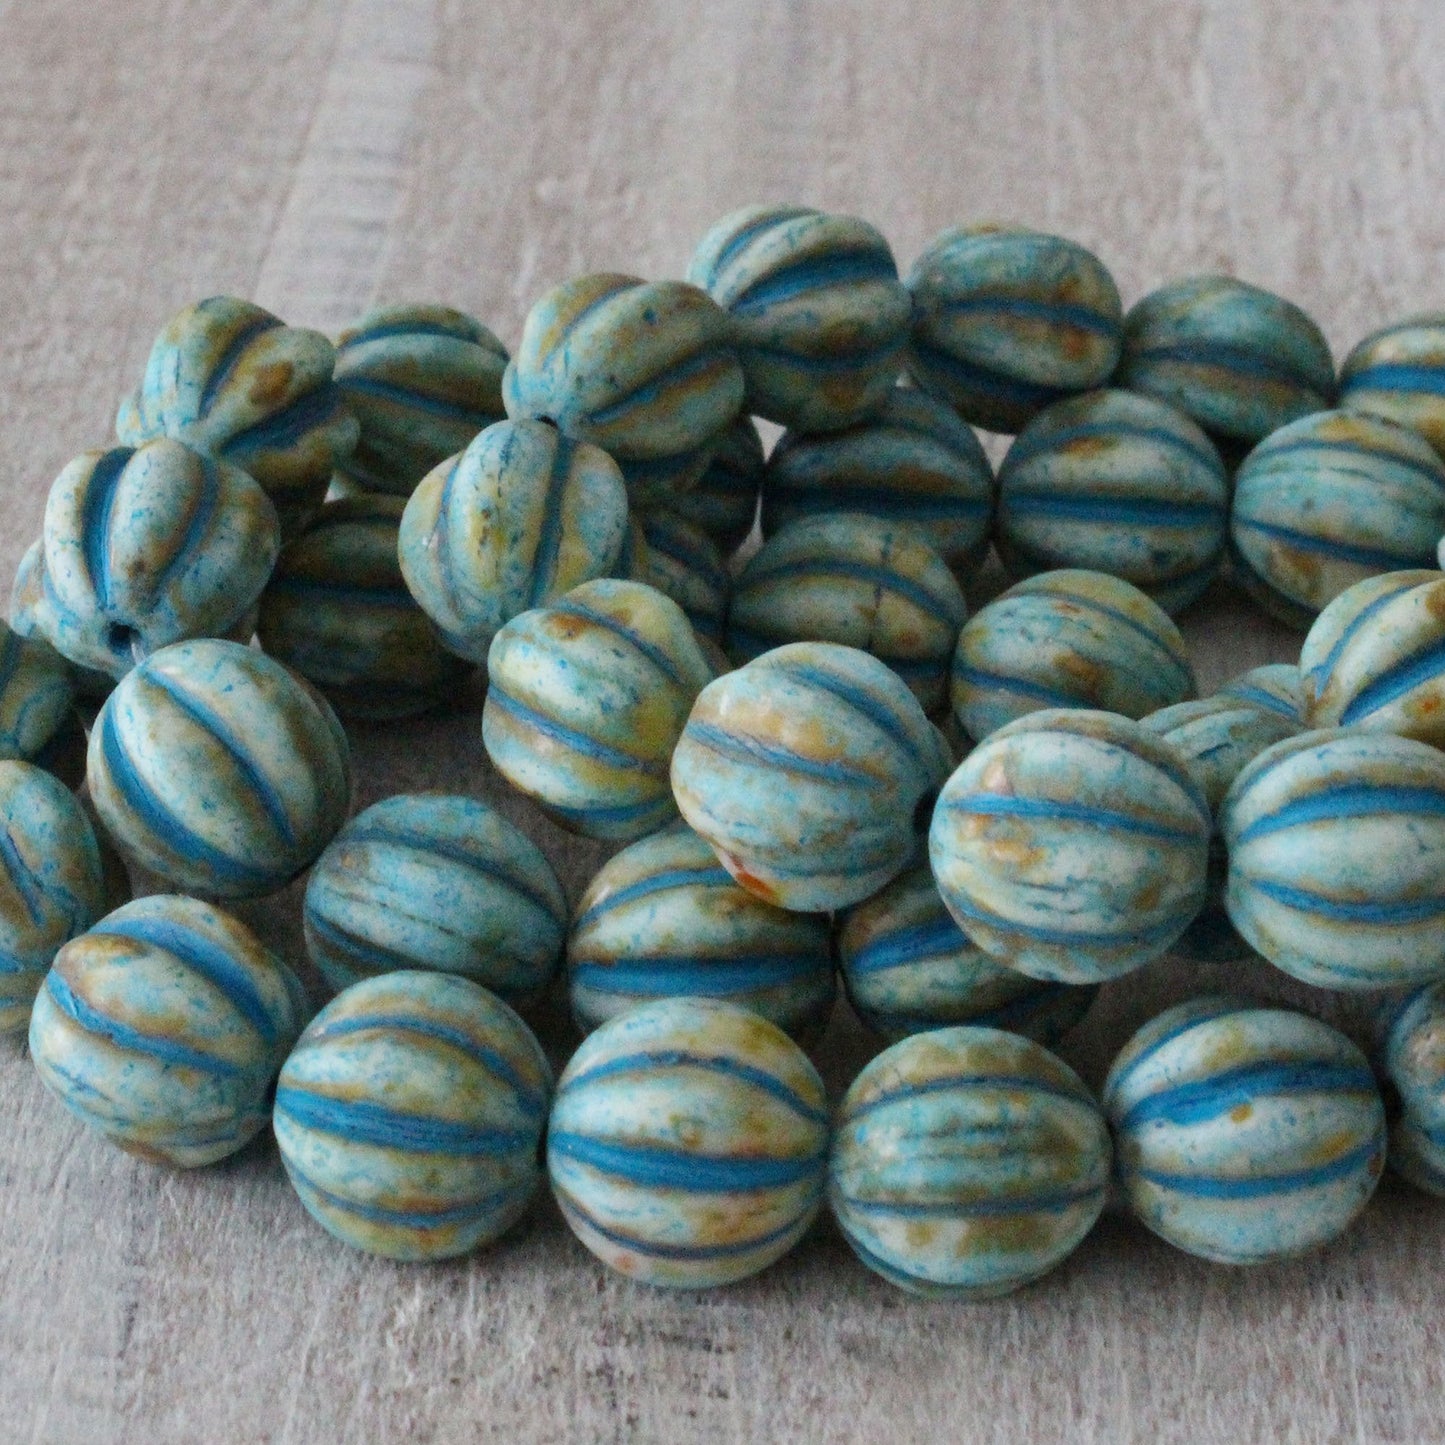 Load image into Gallery viewer, 10mm Melon Beads - Aged Ivory with Turquoise - 15 Beads
